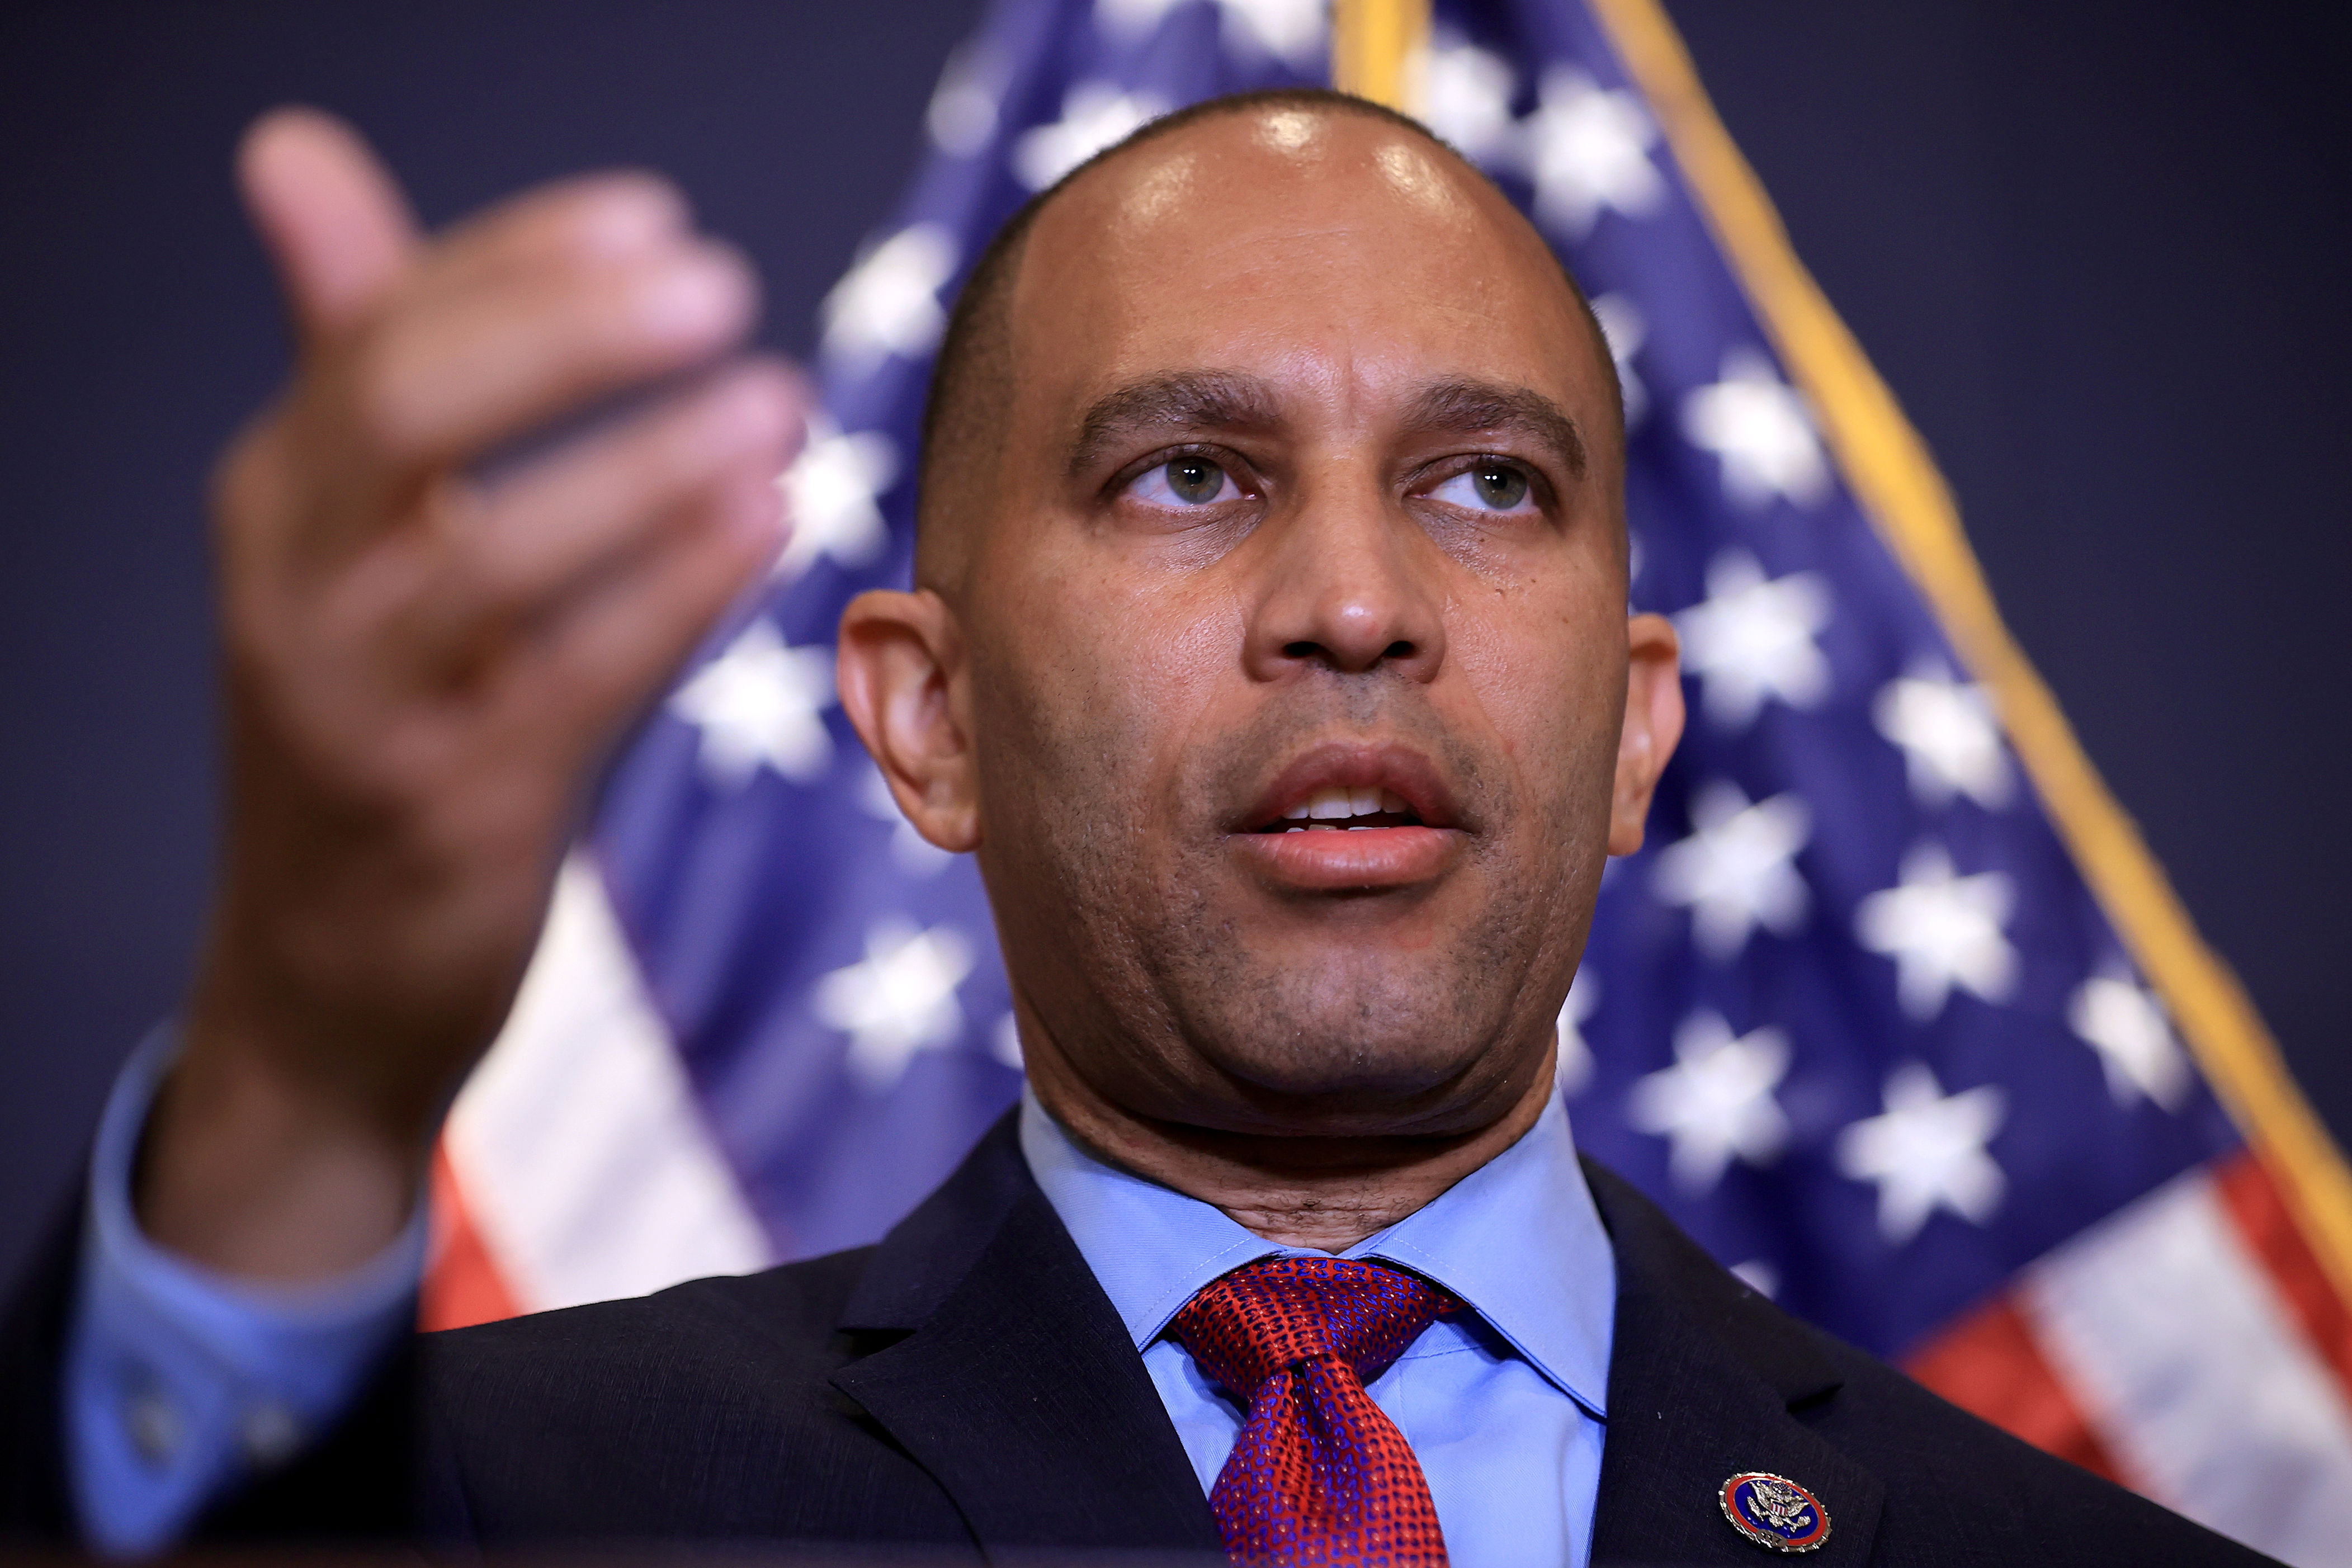 <p><span>On Nov. 30, 2022, Democrats in the U.S. House of Representatives unanimously elected New York Rep. Hakeem Jeffries as House Democratic leader for the 118th Congress that convened on Jan. 3, 2023, replacing outgoing House Speaker Nancy Pelosi -- making him the first Black party leader in American history.</span></p>